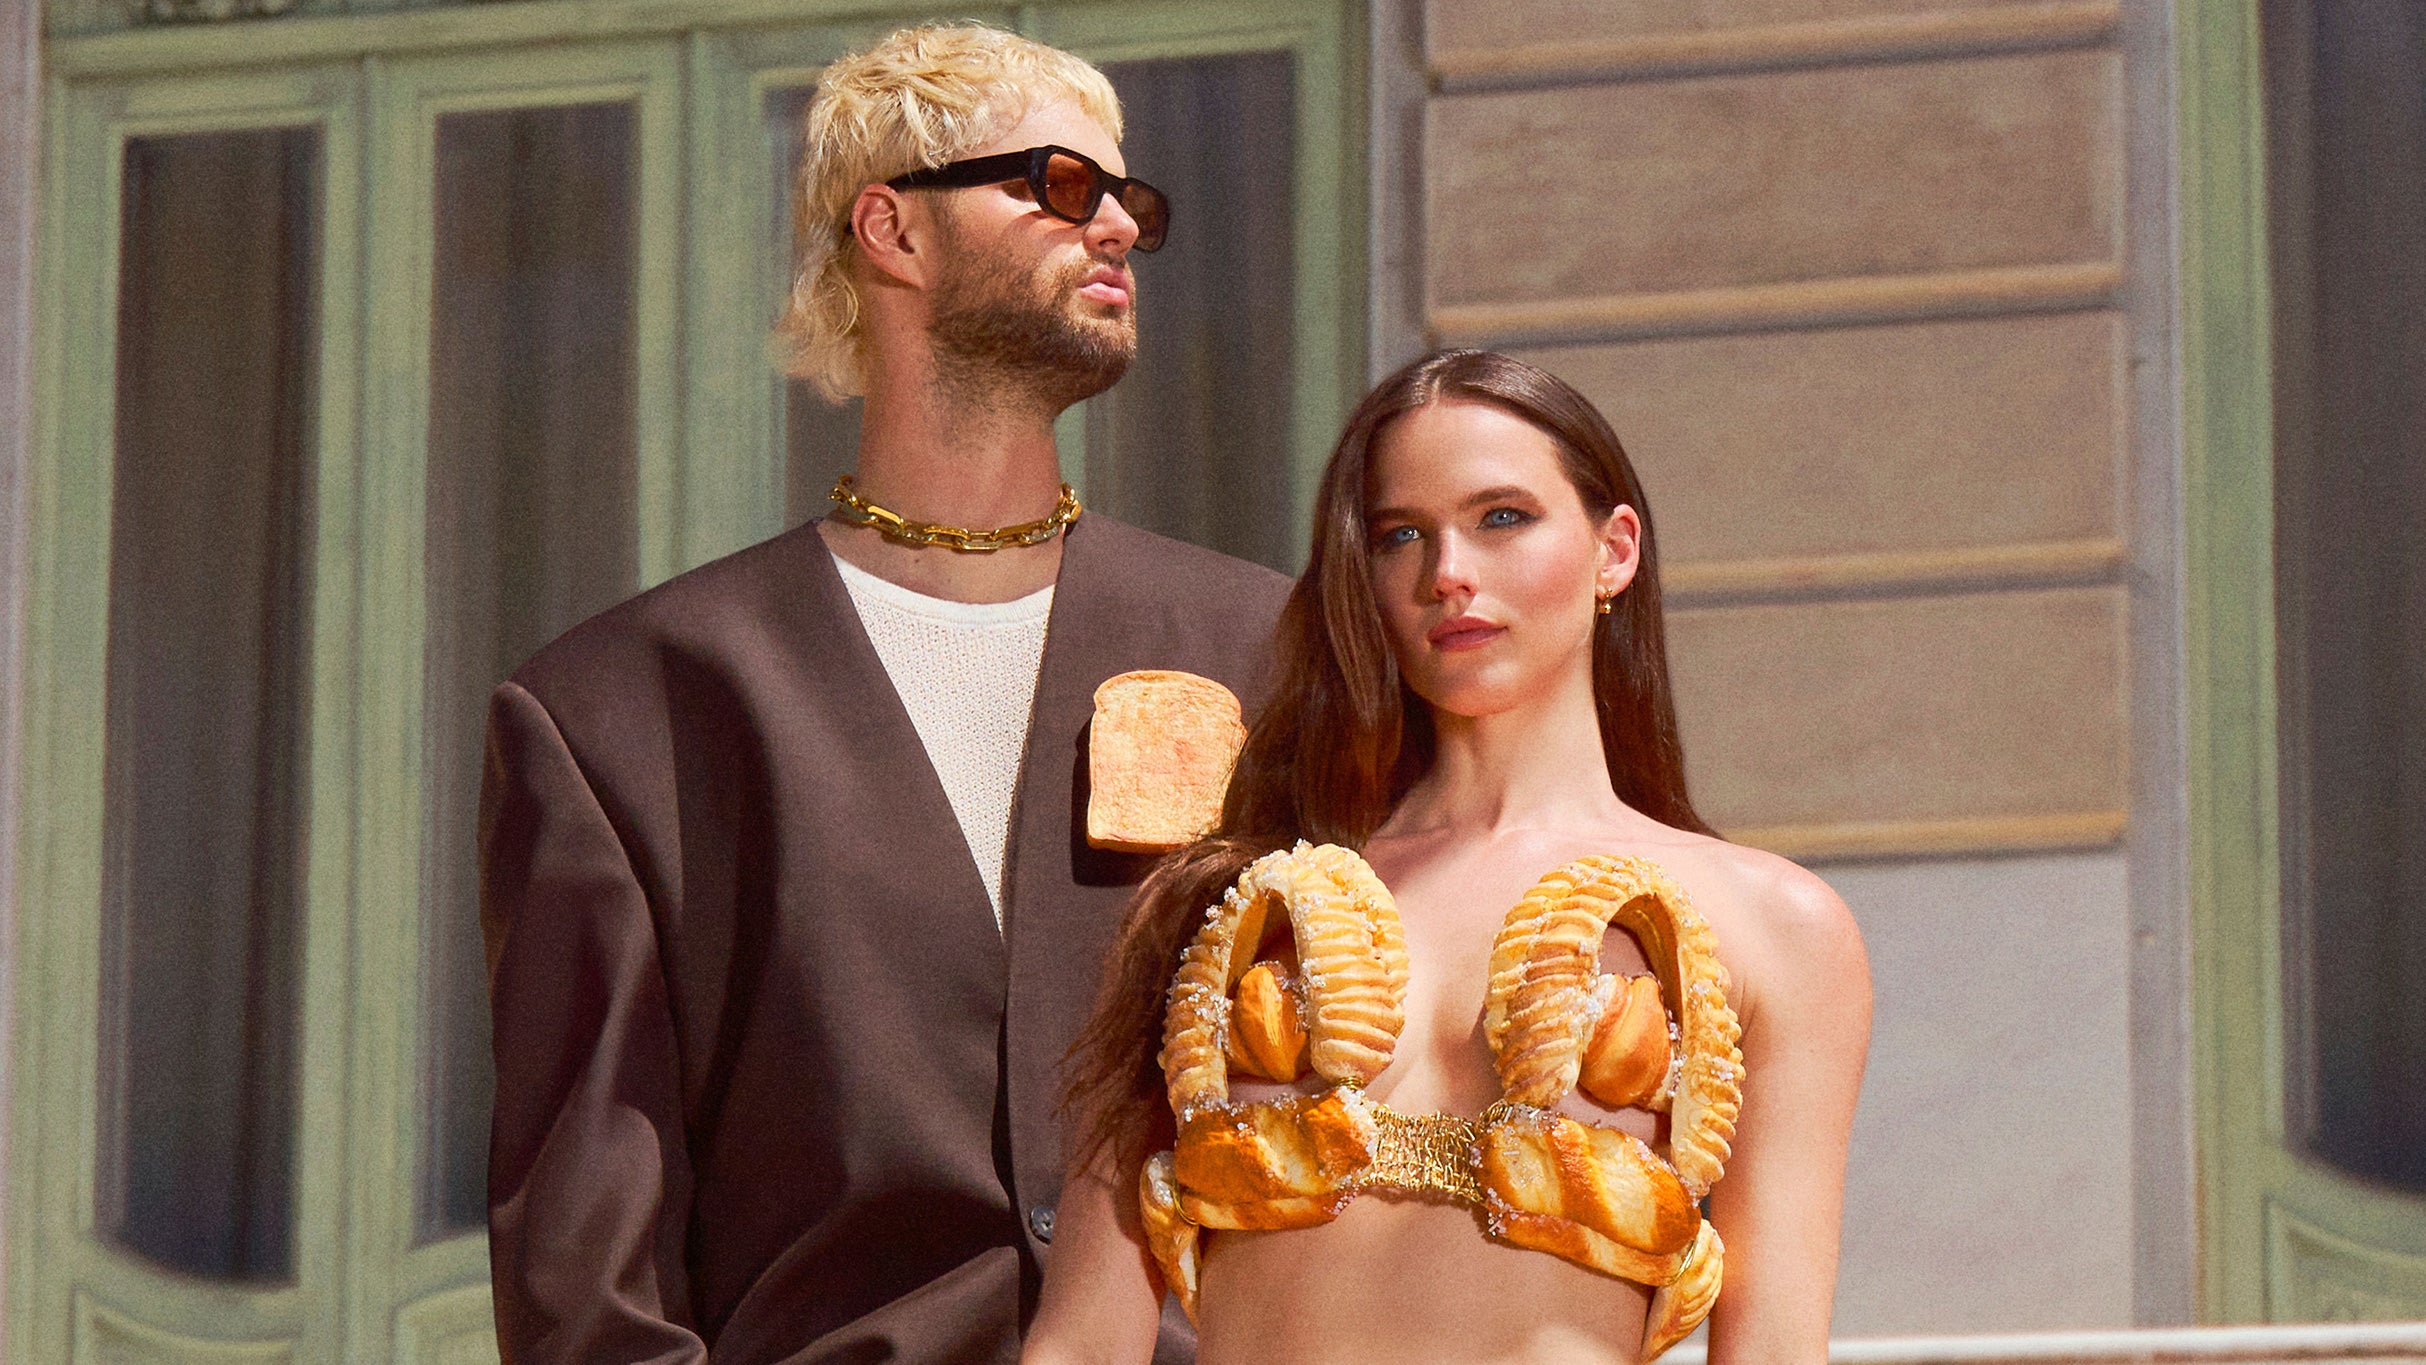 SOFI TUKKER - The BREAD Tour presale code for performance tickets in Austin, TX (Moody Amphitheater)